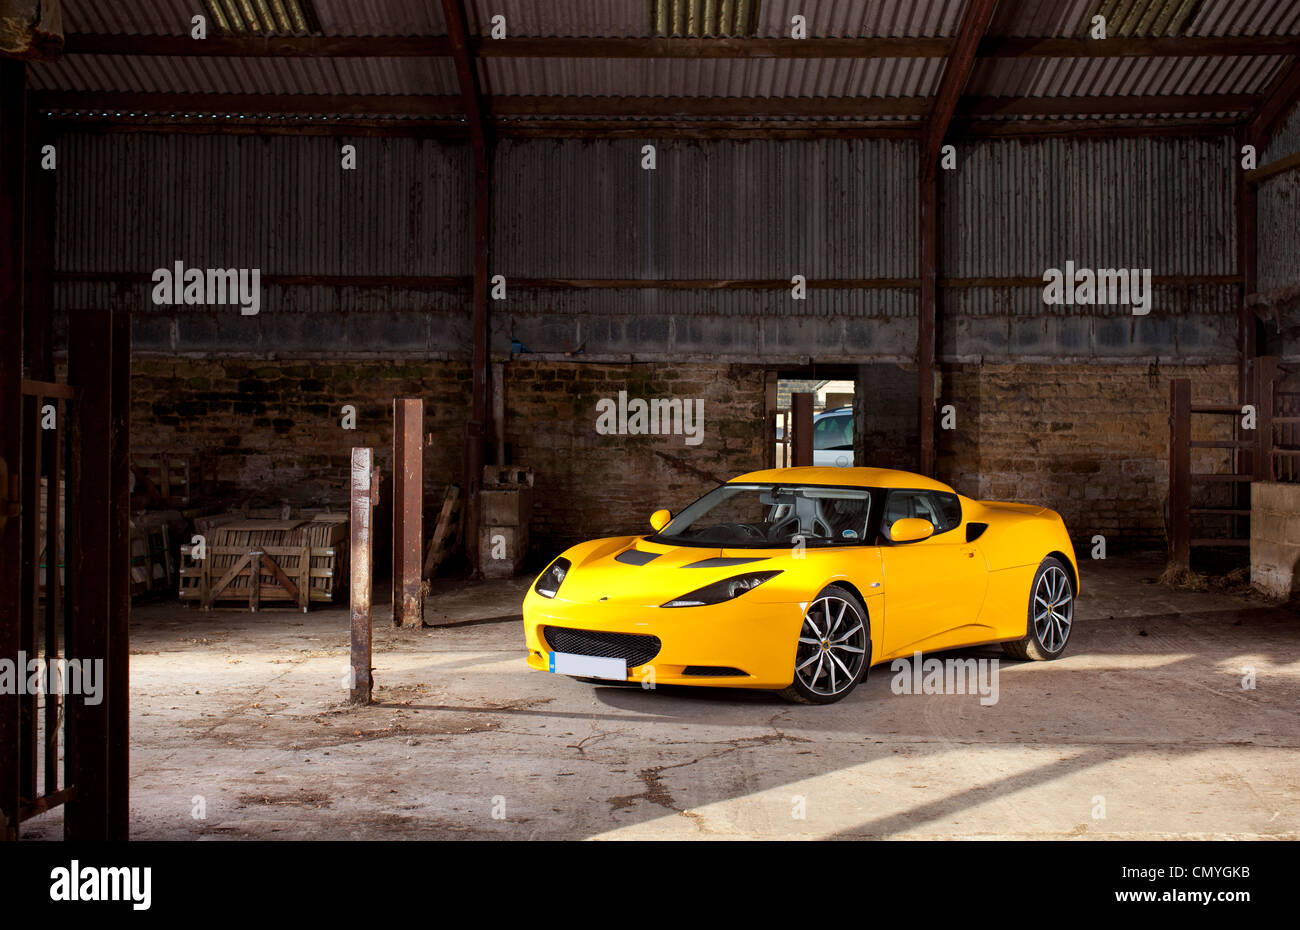 Yellow Lotus Evora sports car on a farm in England, UK. The fast two seater supercar is made in Norfolk. Stock Photo